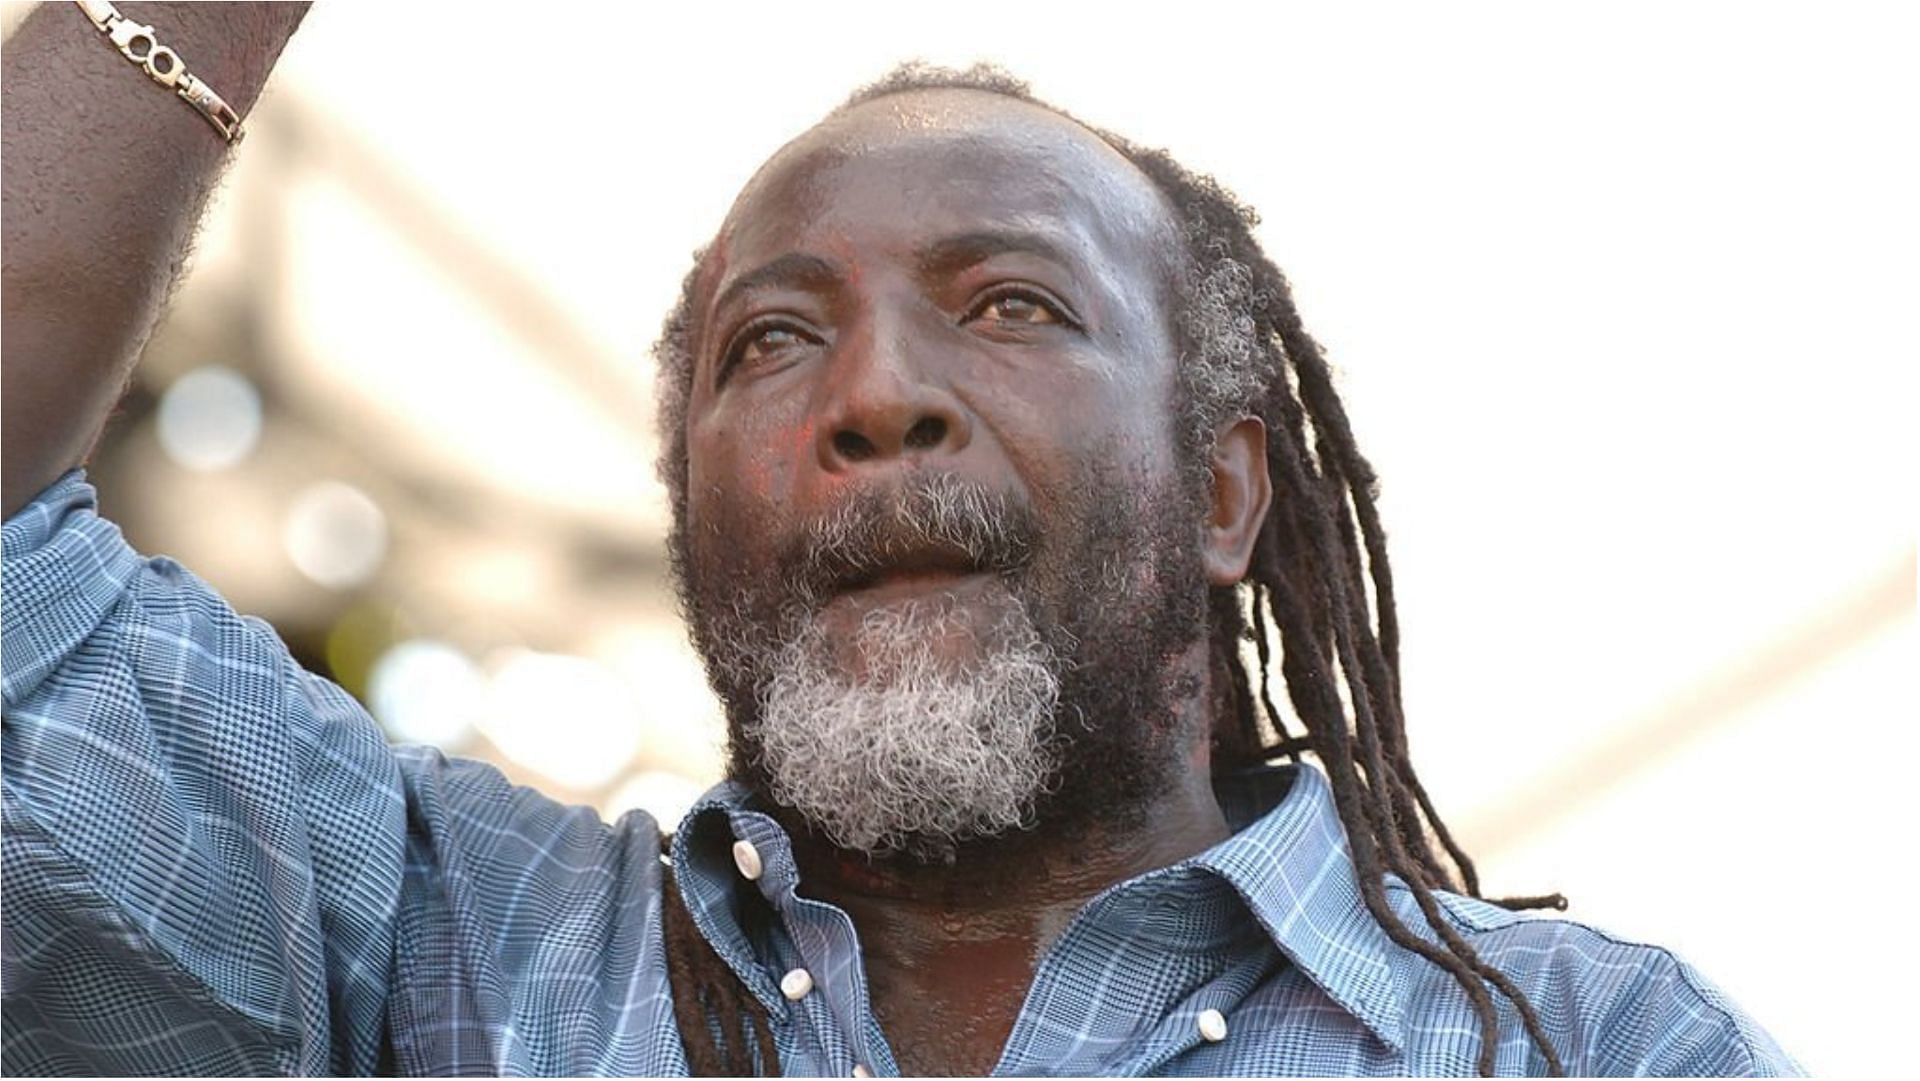 Freddie McGregor is currently recovering from his stroke (Image via Jun Sato/Getty Images) 